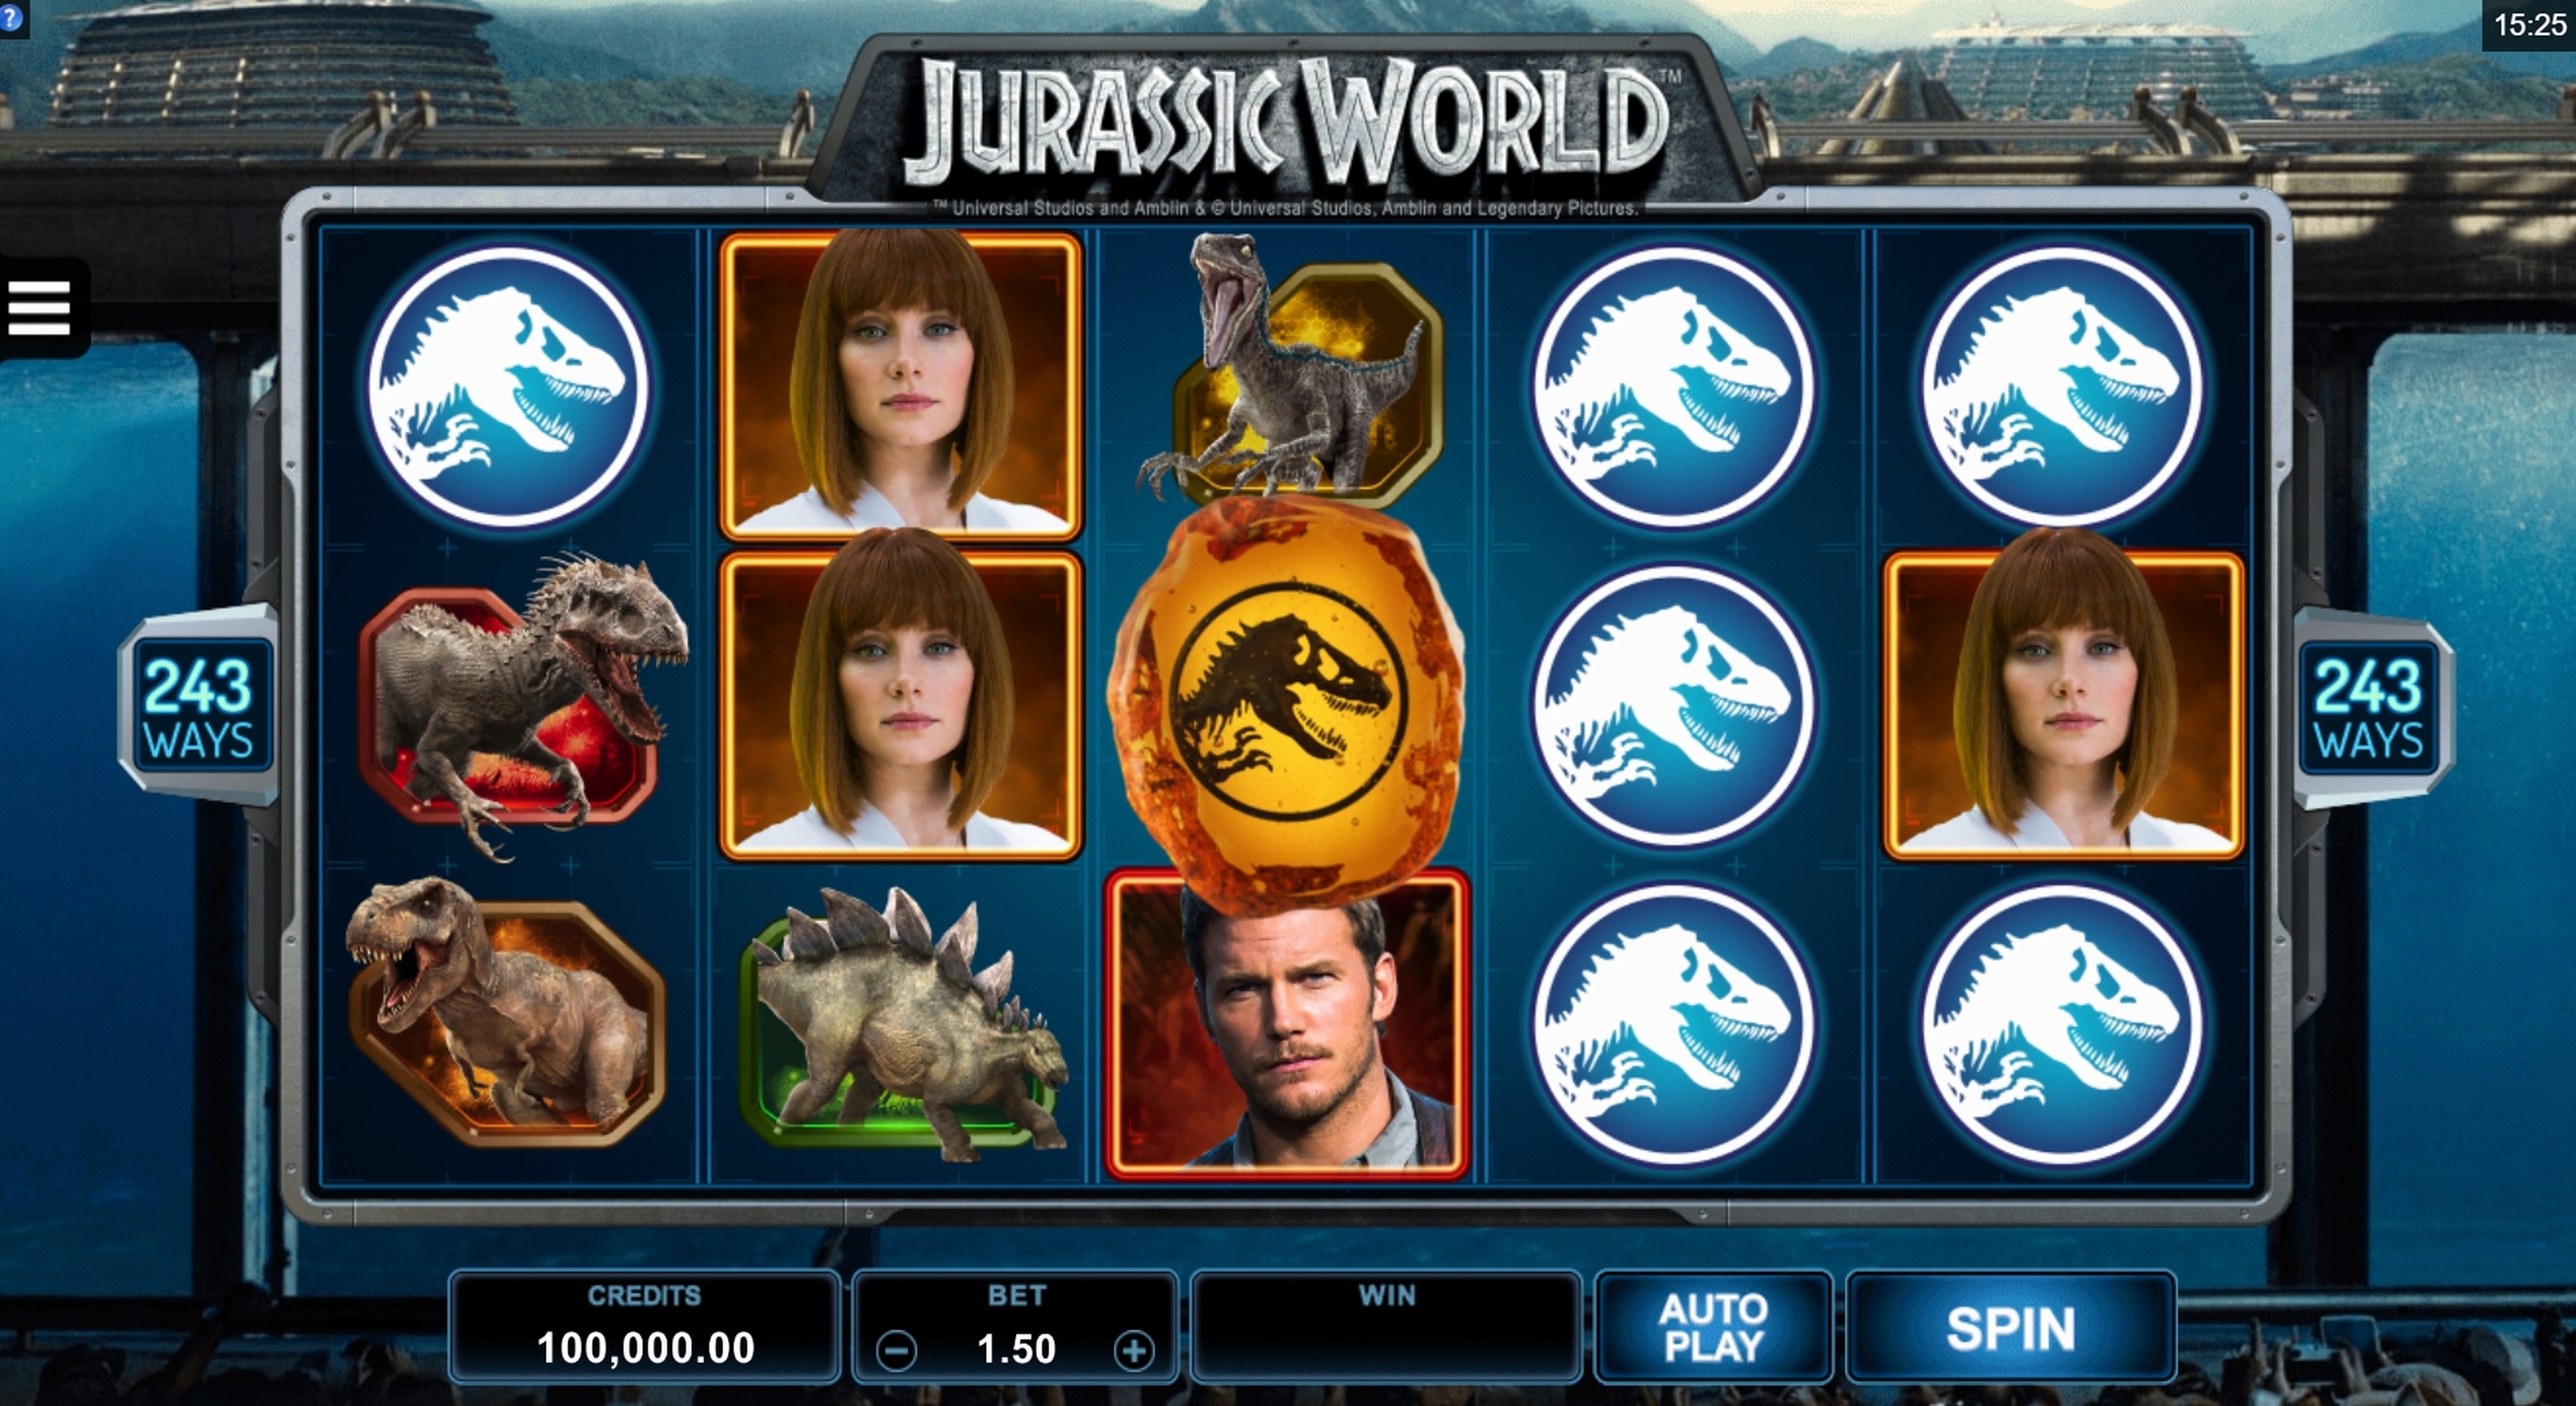 Reels in Jurassic World Slot Game by Microgaming